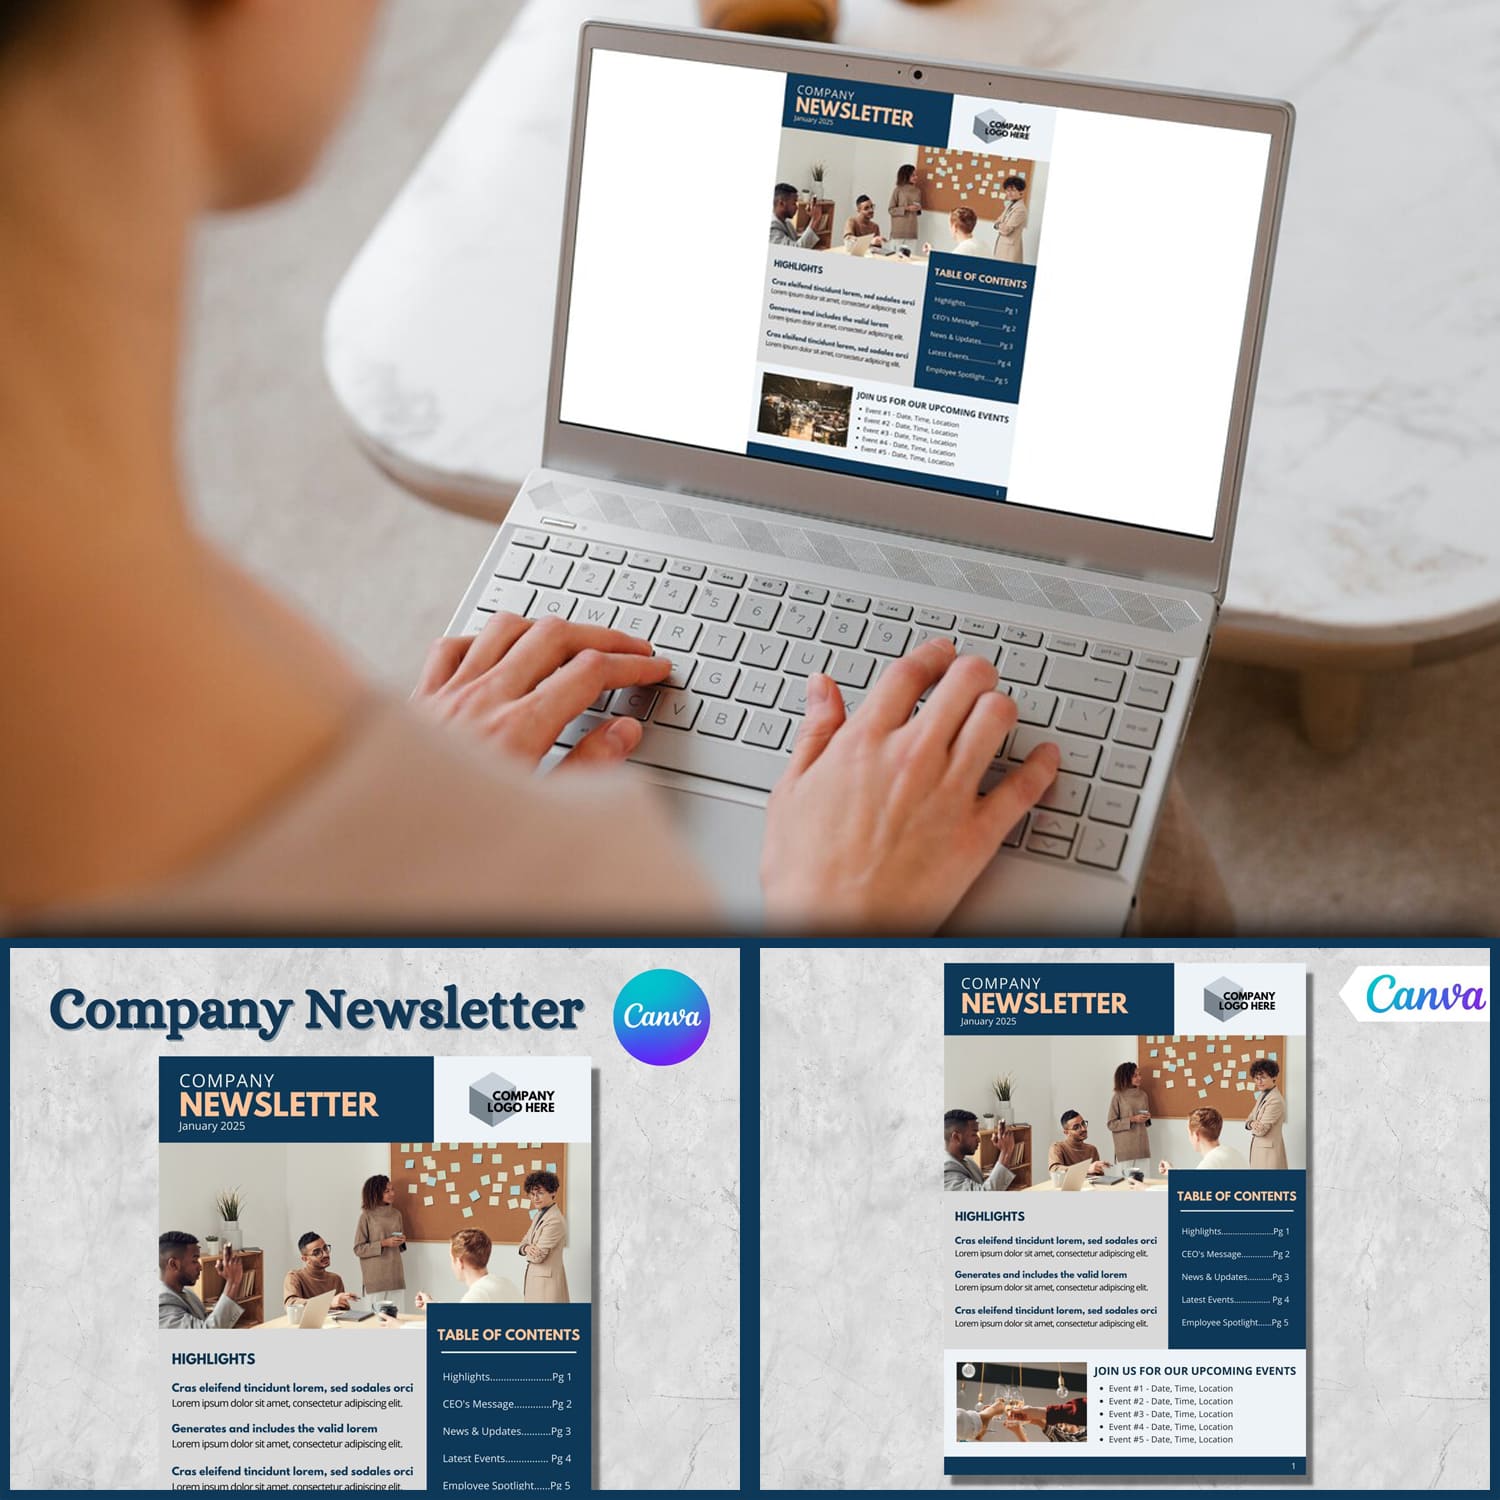 A set of gorgeous images of a company newsletter email design template.